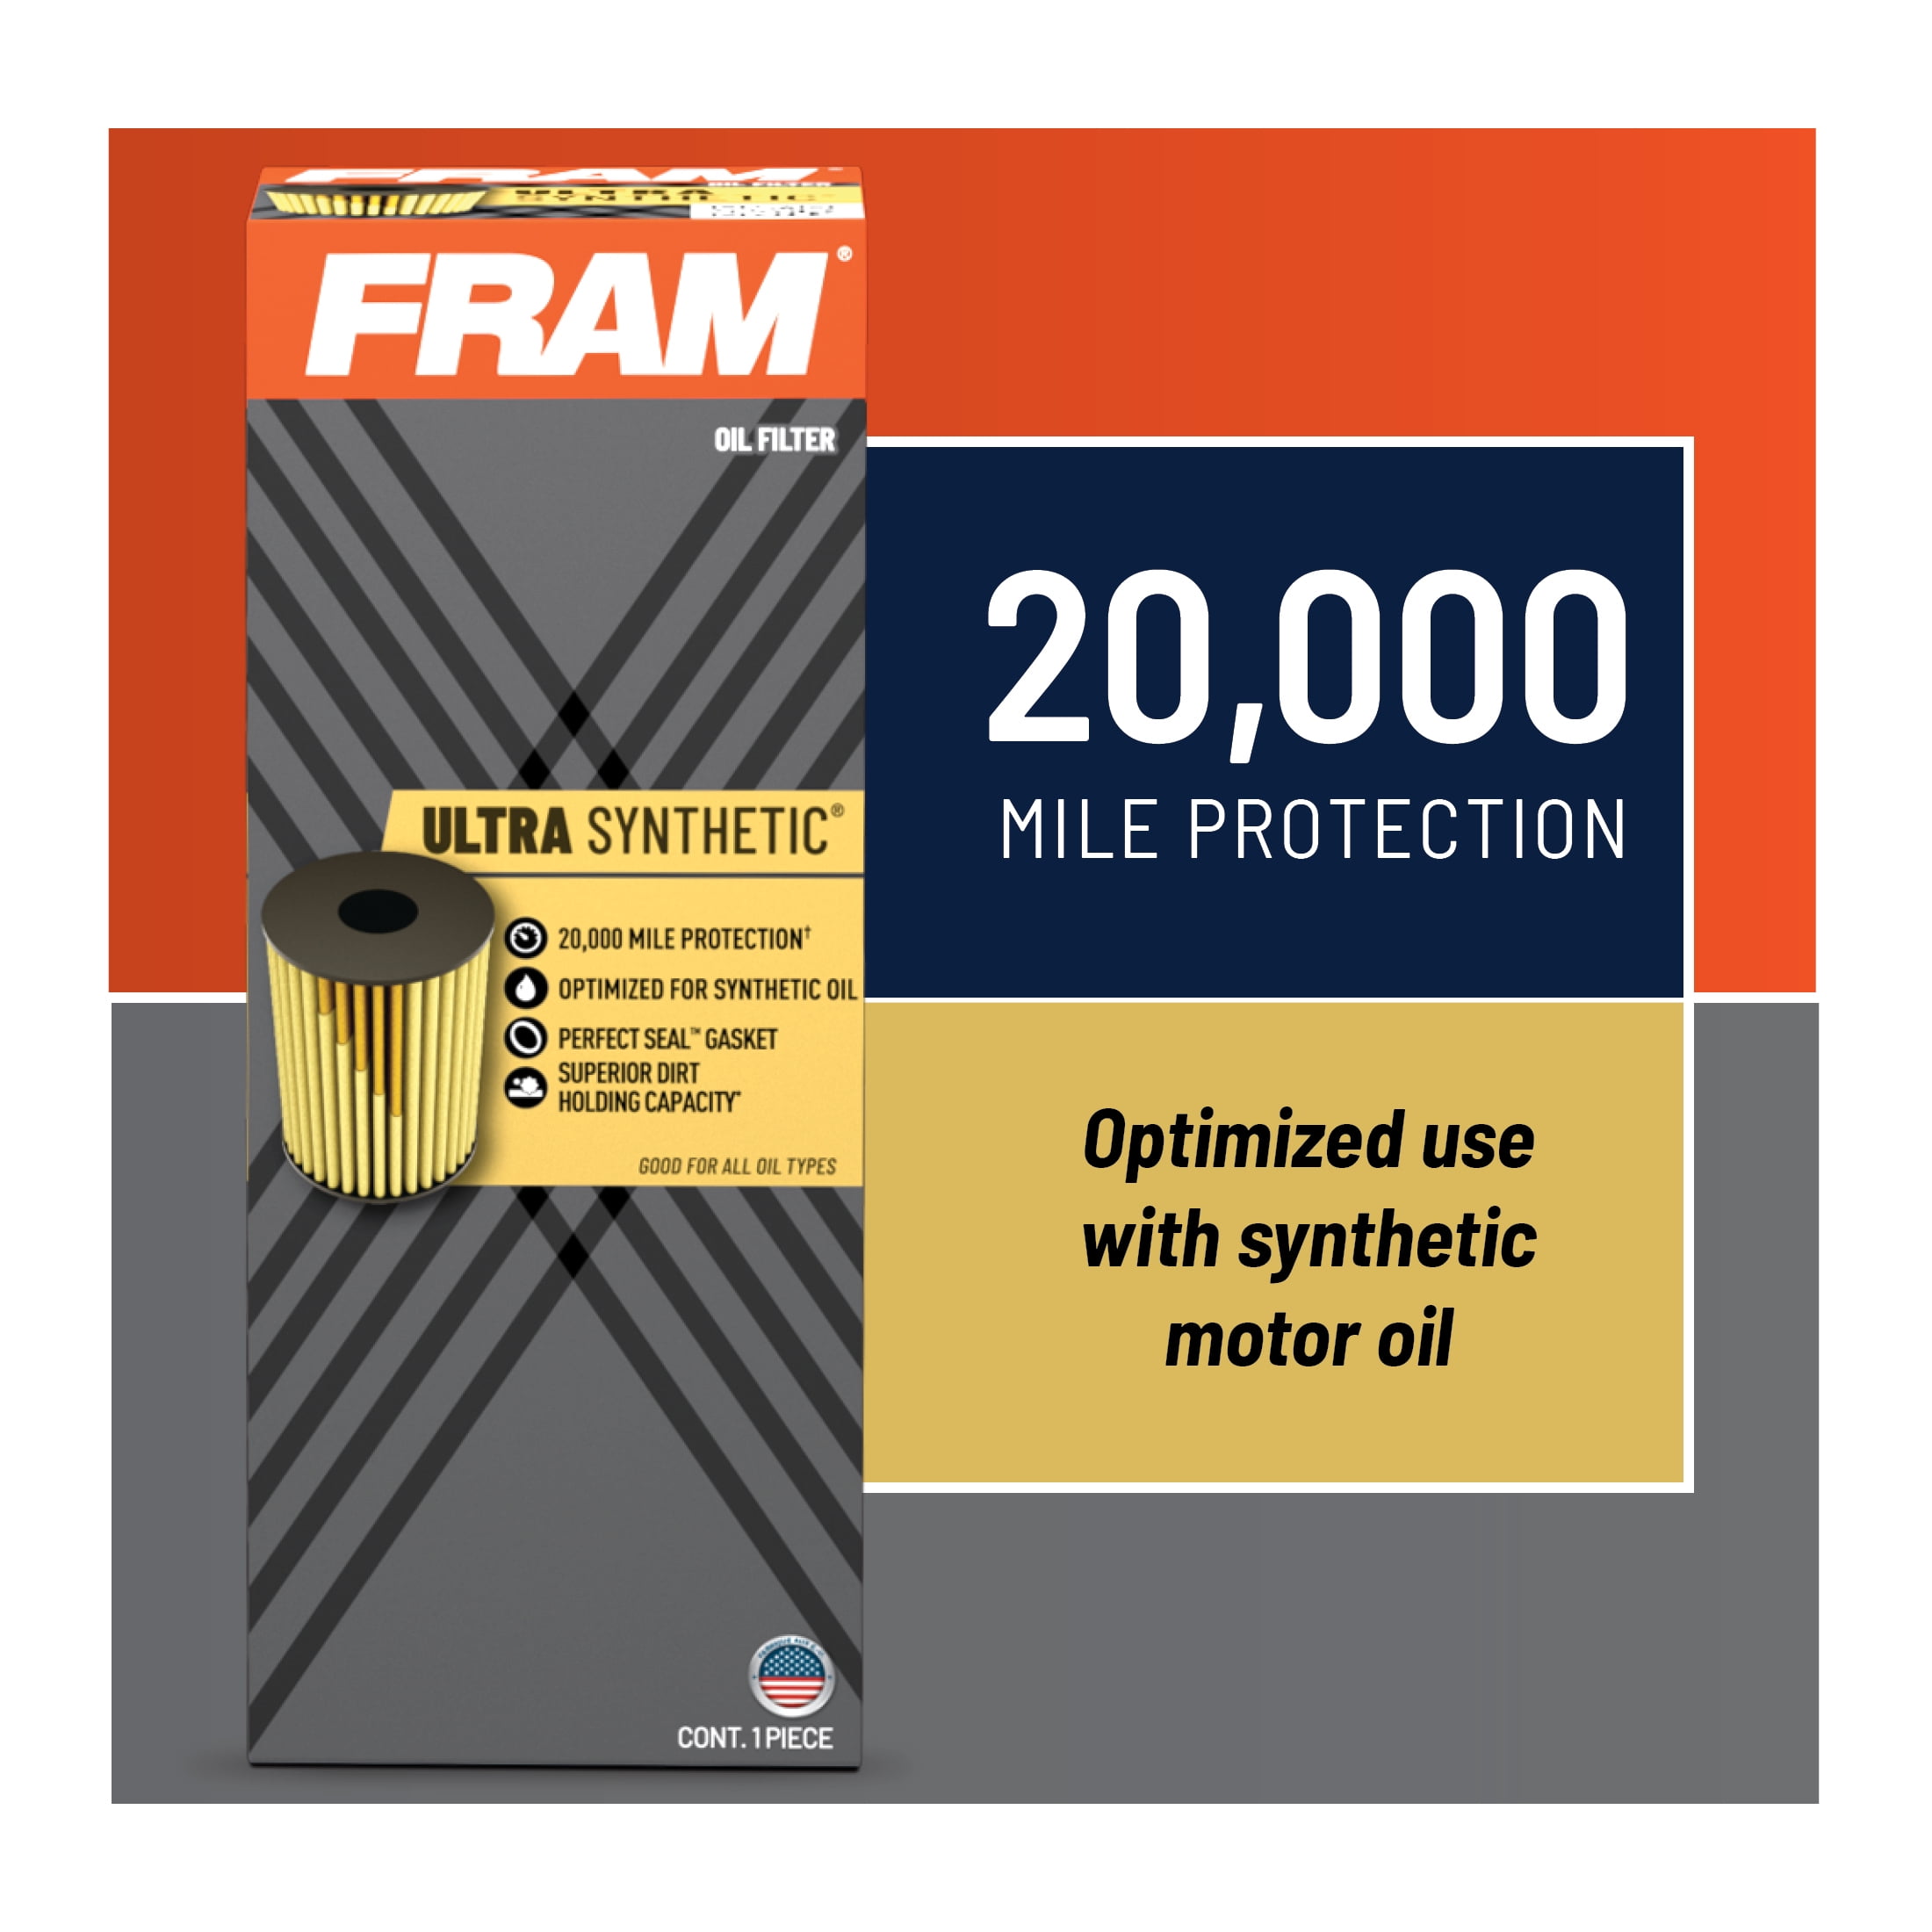 FRAM Ultra Synthetic Automotive Replacement Oil Filter Designed for Synthetic Oil Changes Lasting up to 20k Miles Pack of 1 XG10075 